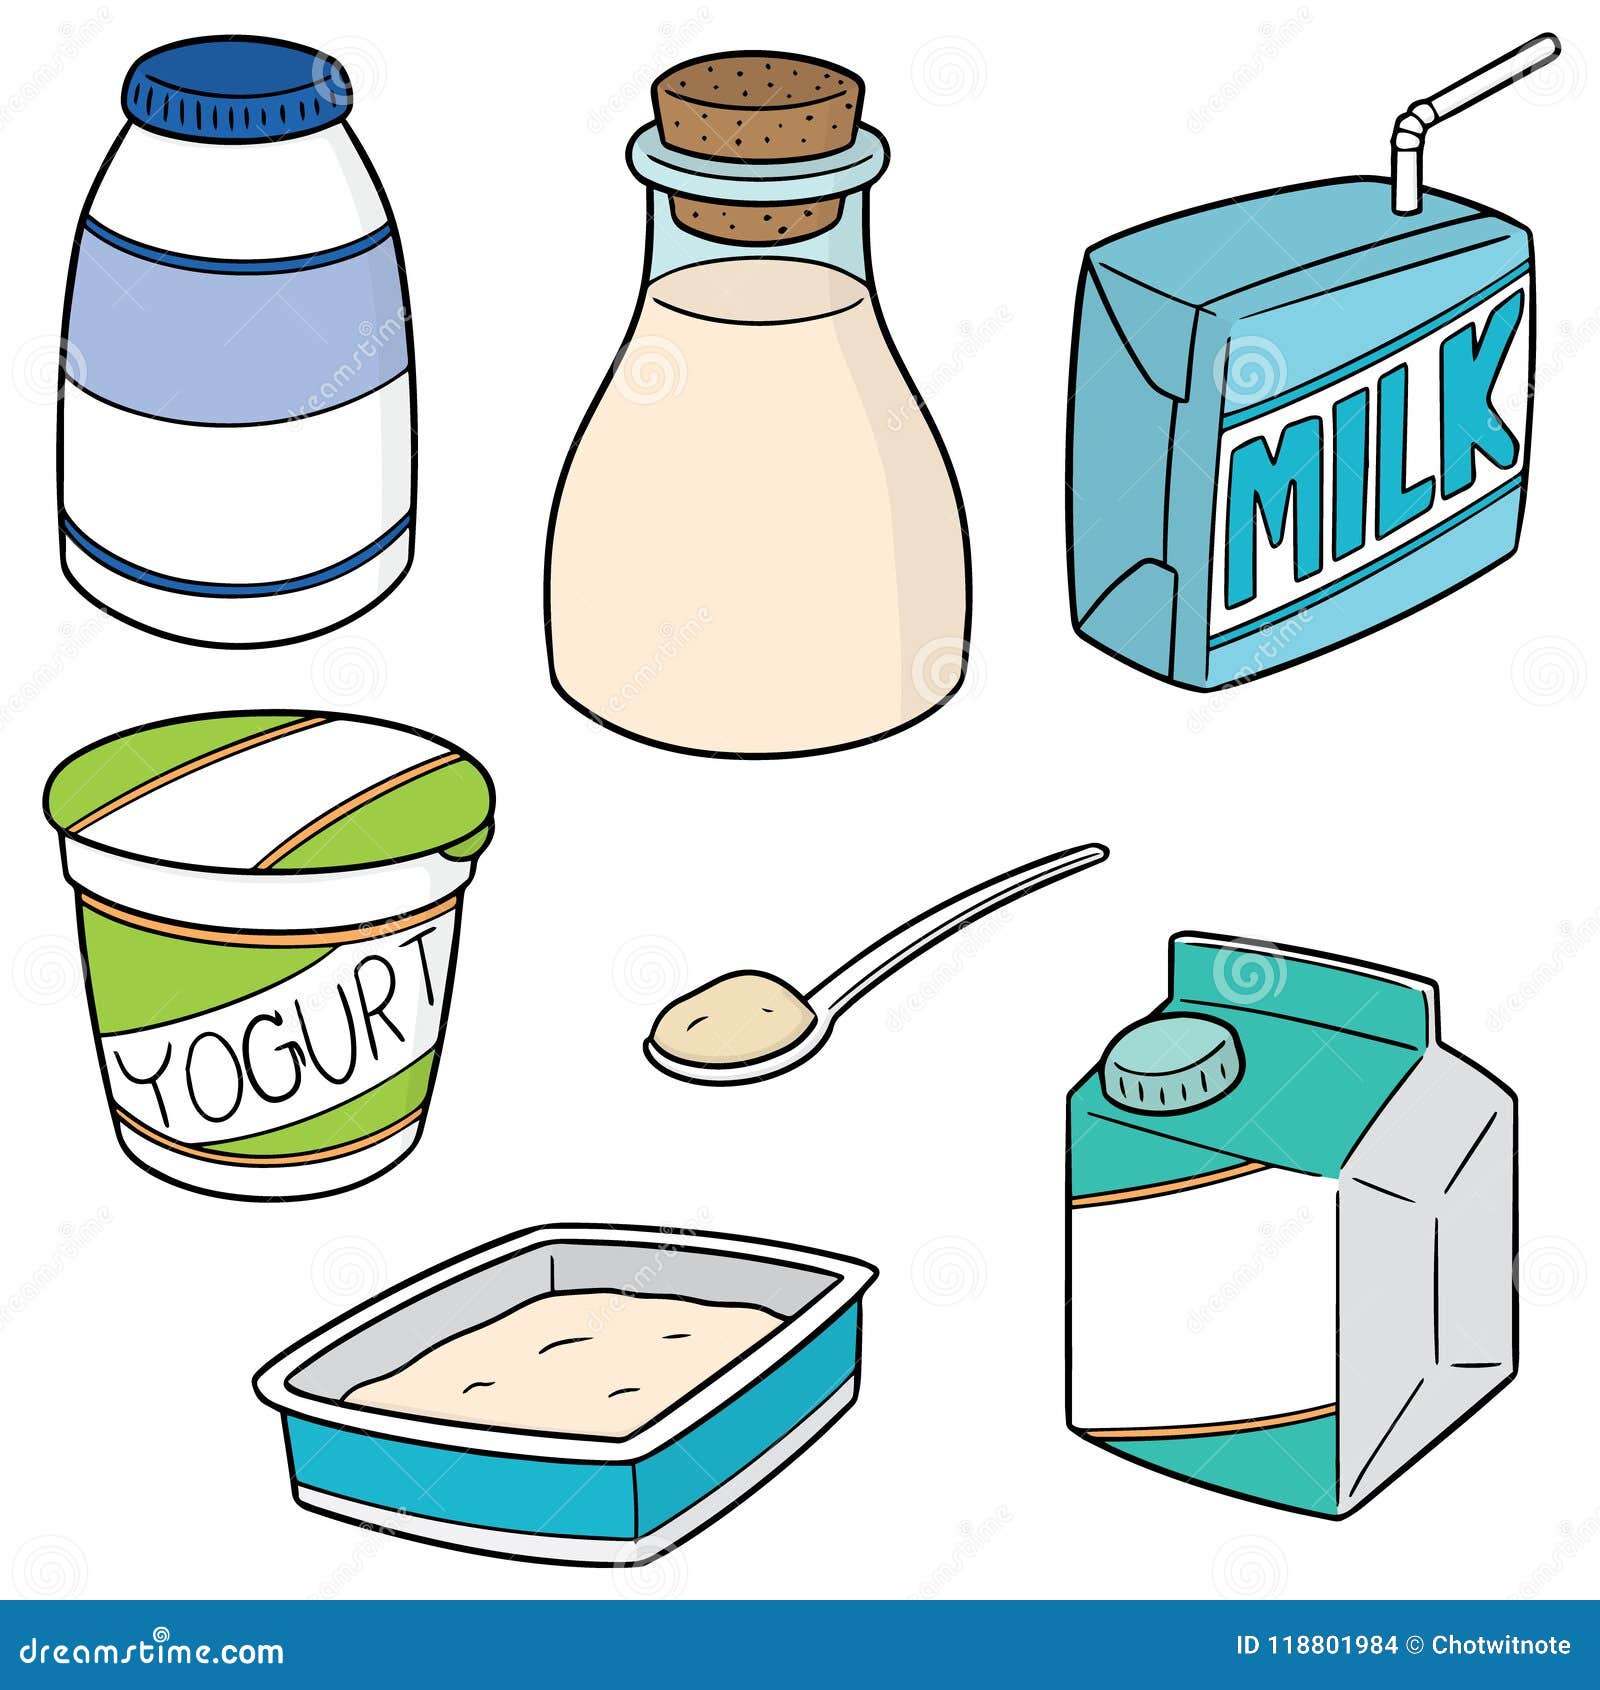 Drawing Diary Milk Products Hand-drawn Illustration Stock Illustration  111488897 | Shutterstock